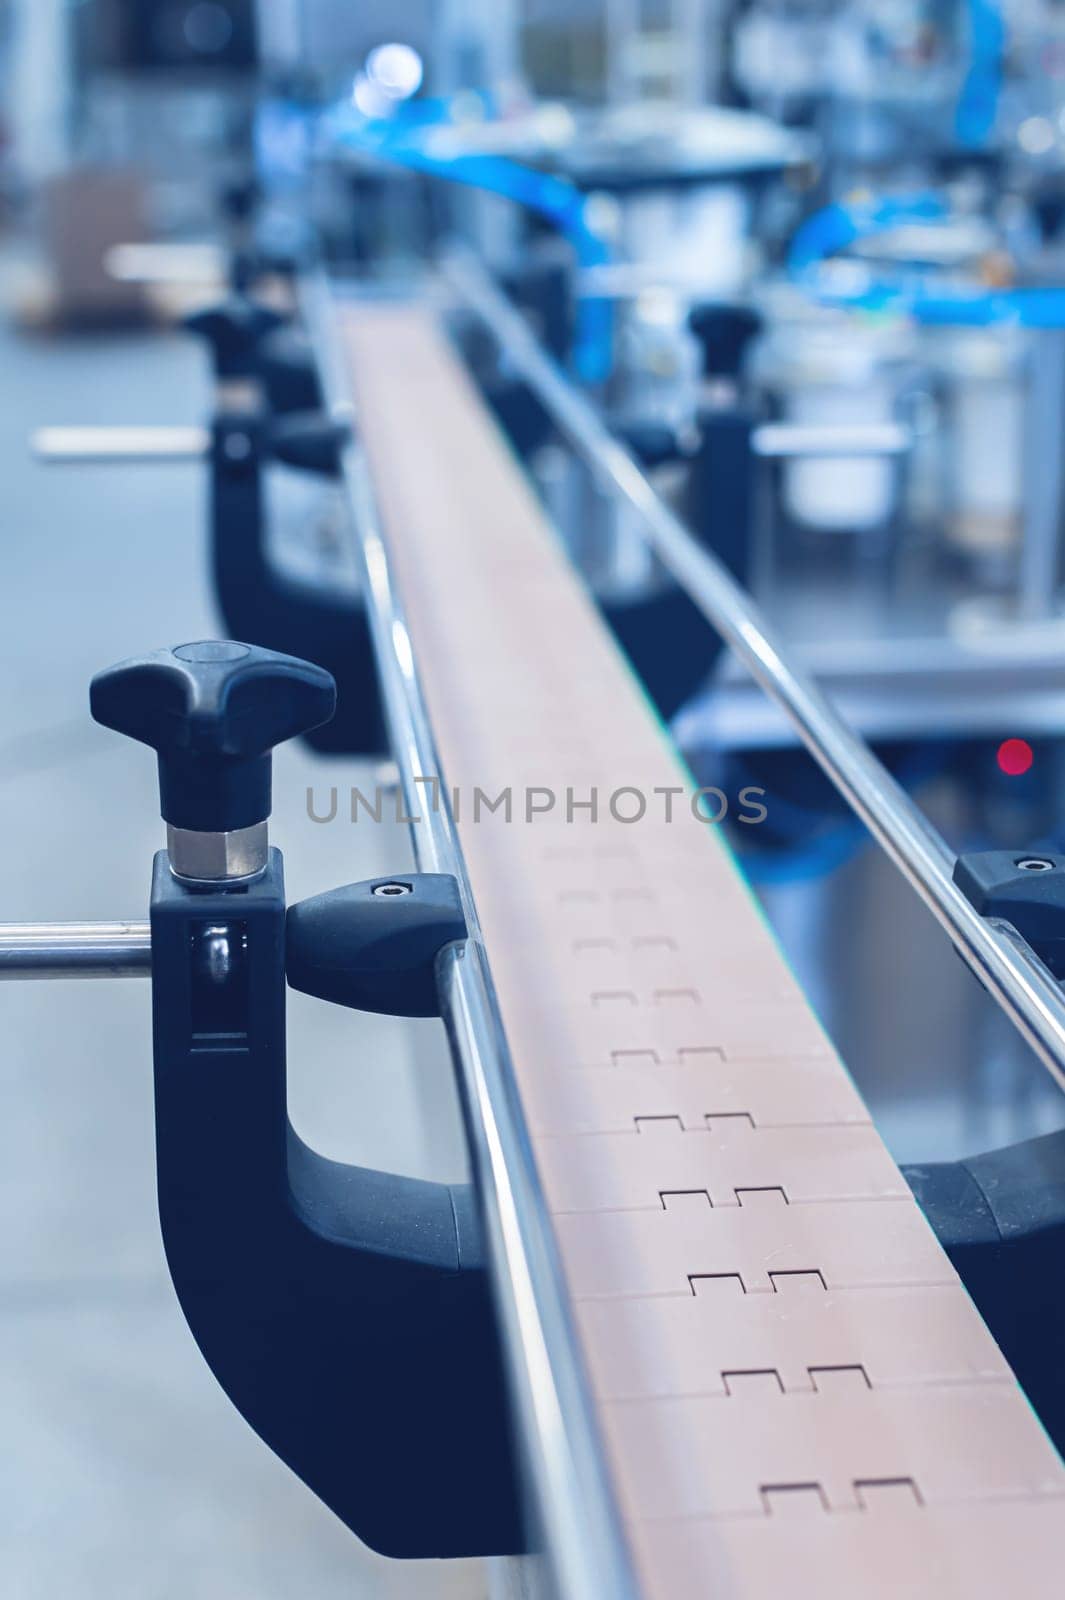 An empty production line conveyor belt at an equipment assembly plant. Toned image